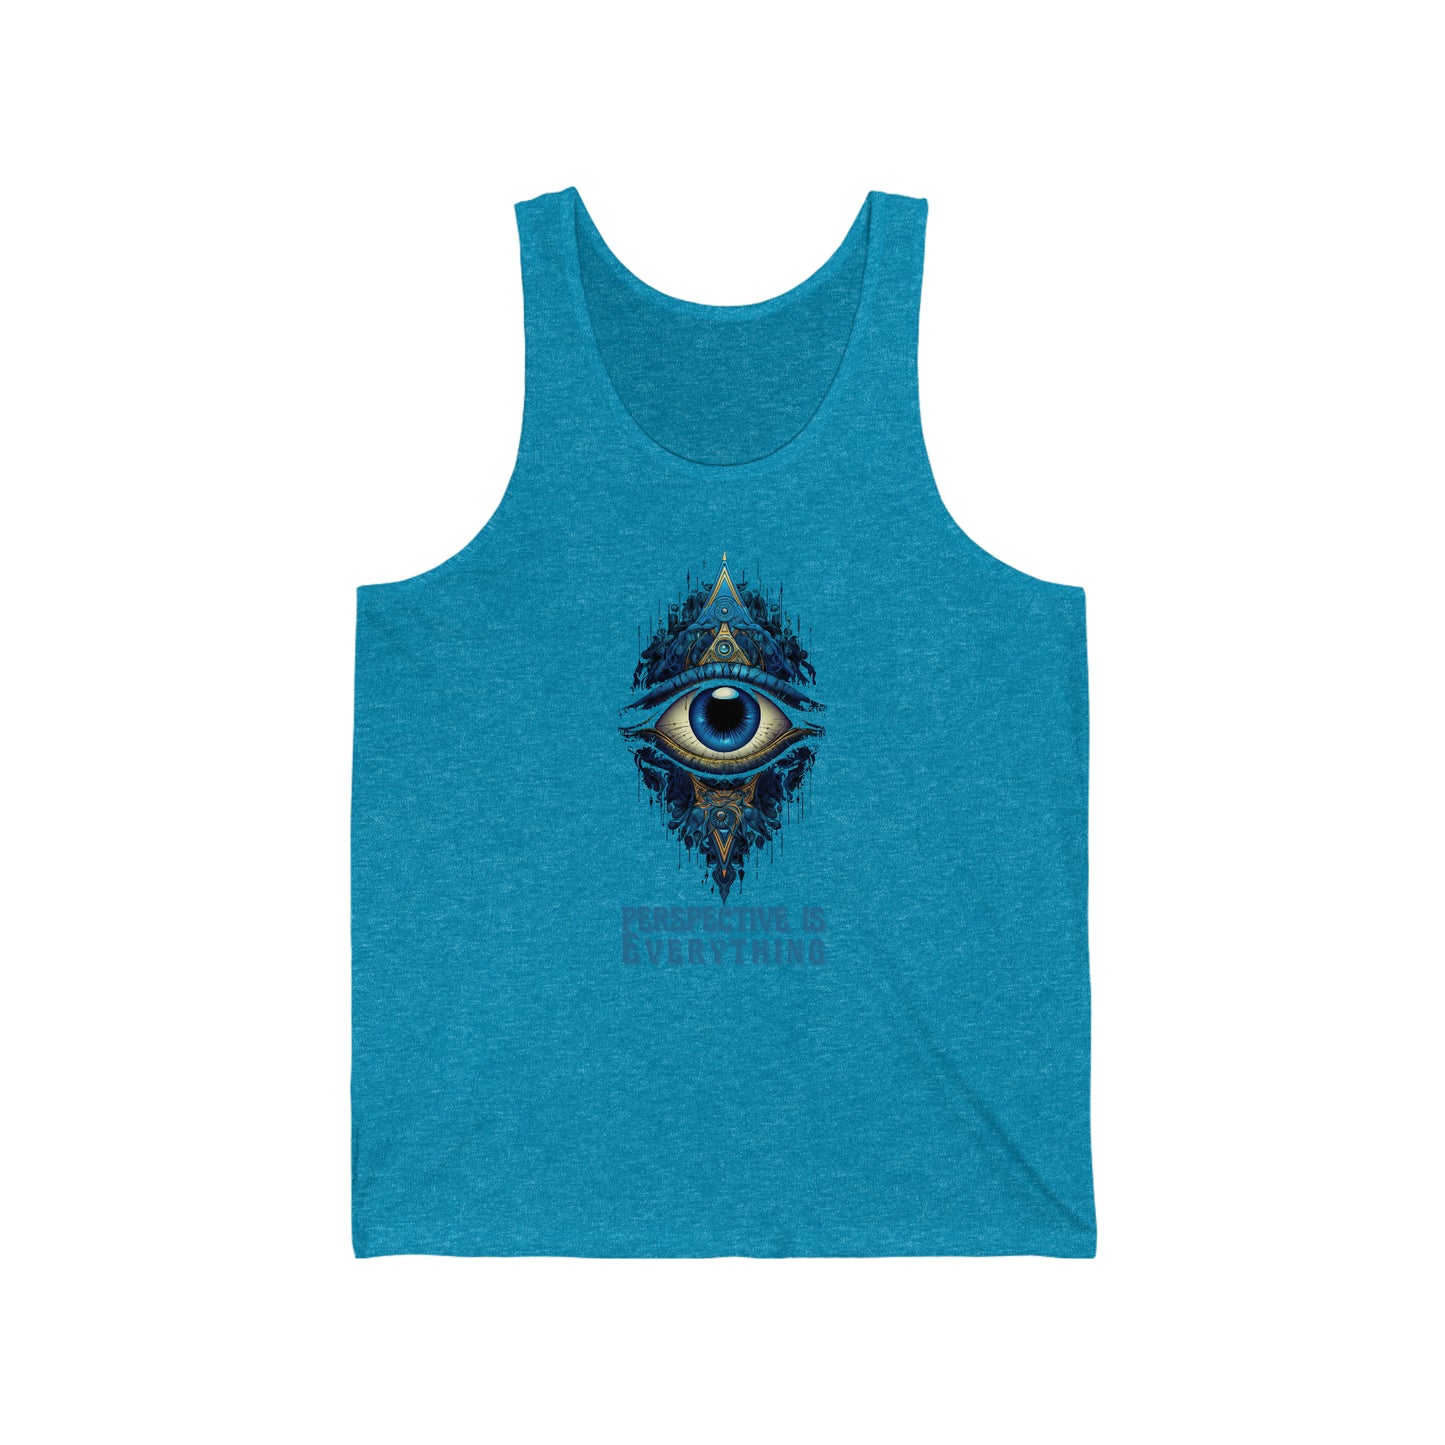 Perspective is Everything: Blue | Unisex Jersey Tank